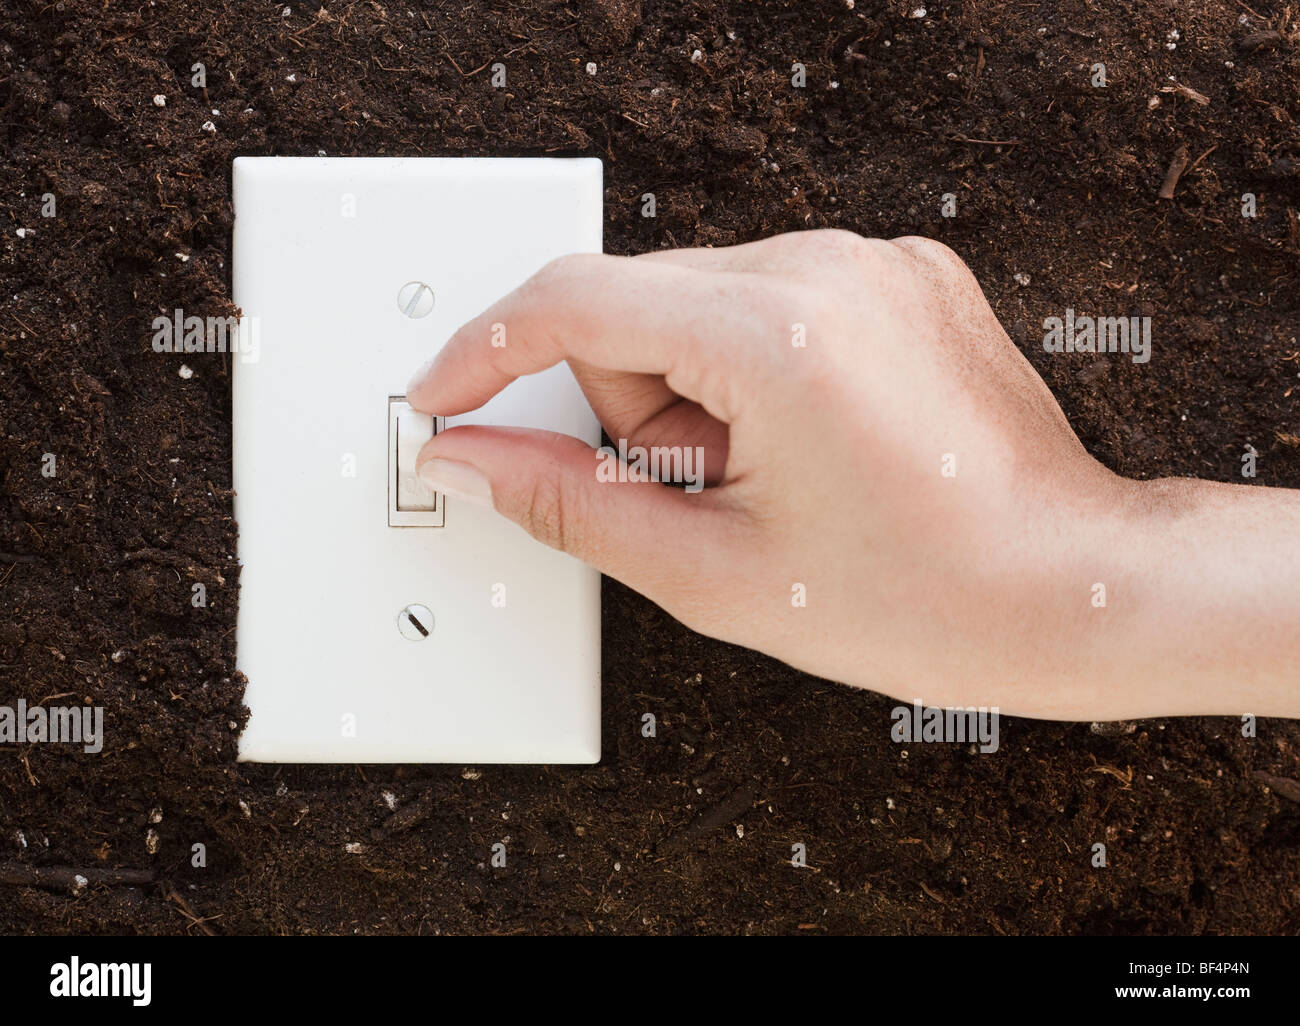 Woman flipping light switch in soil Stock Photo